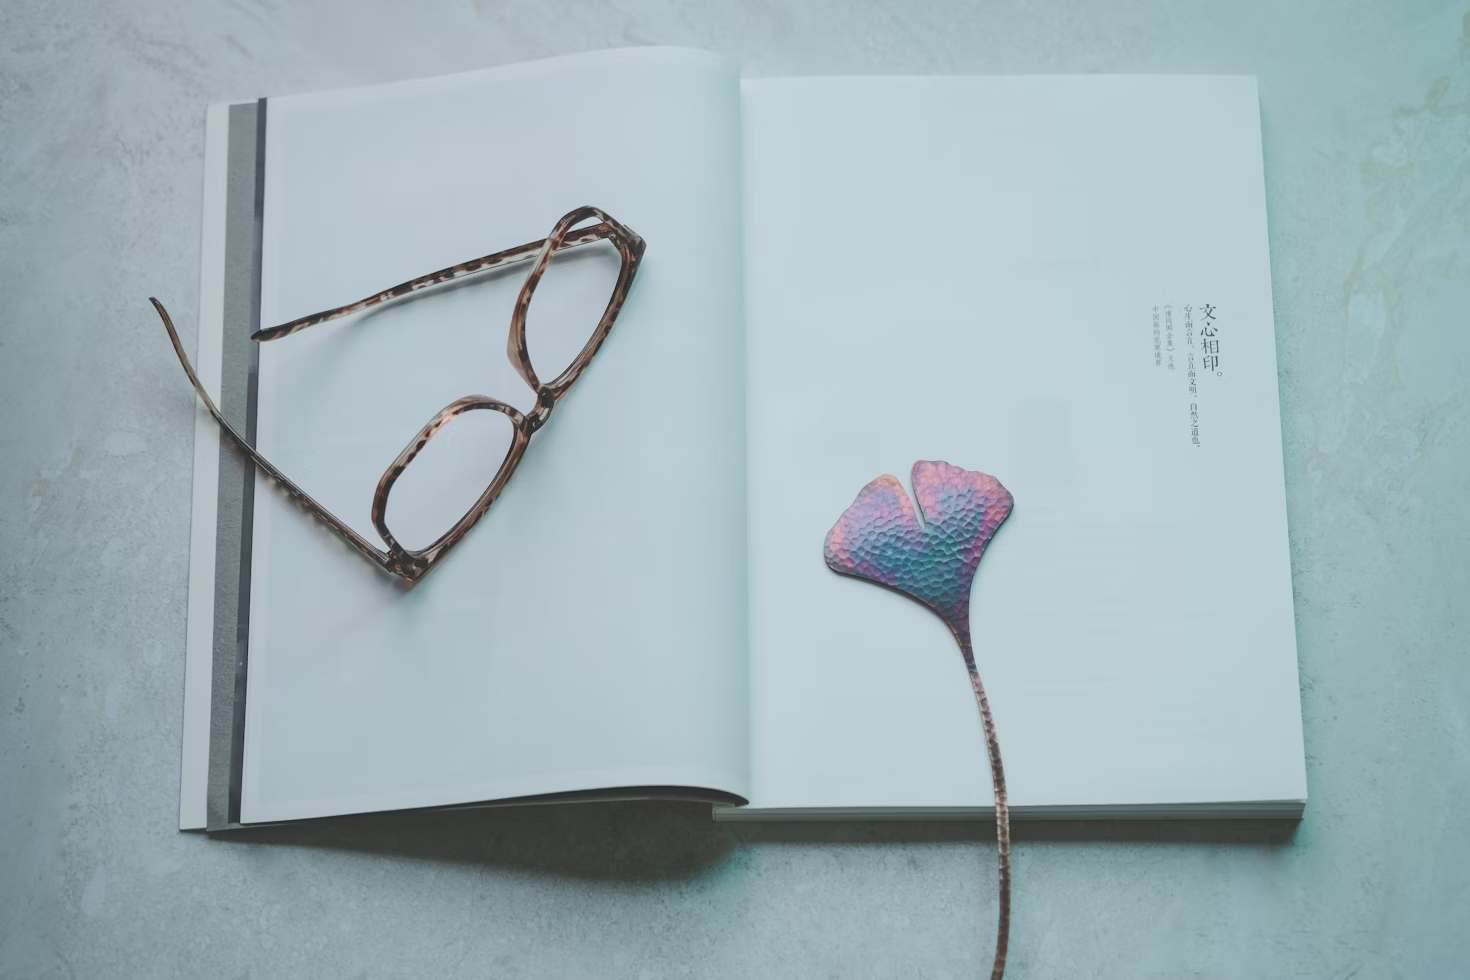 Eyeglasses and bookmark on top of an opened book